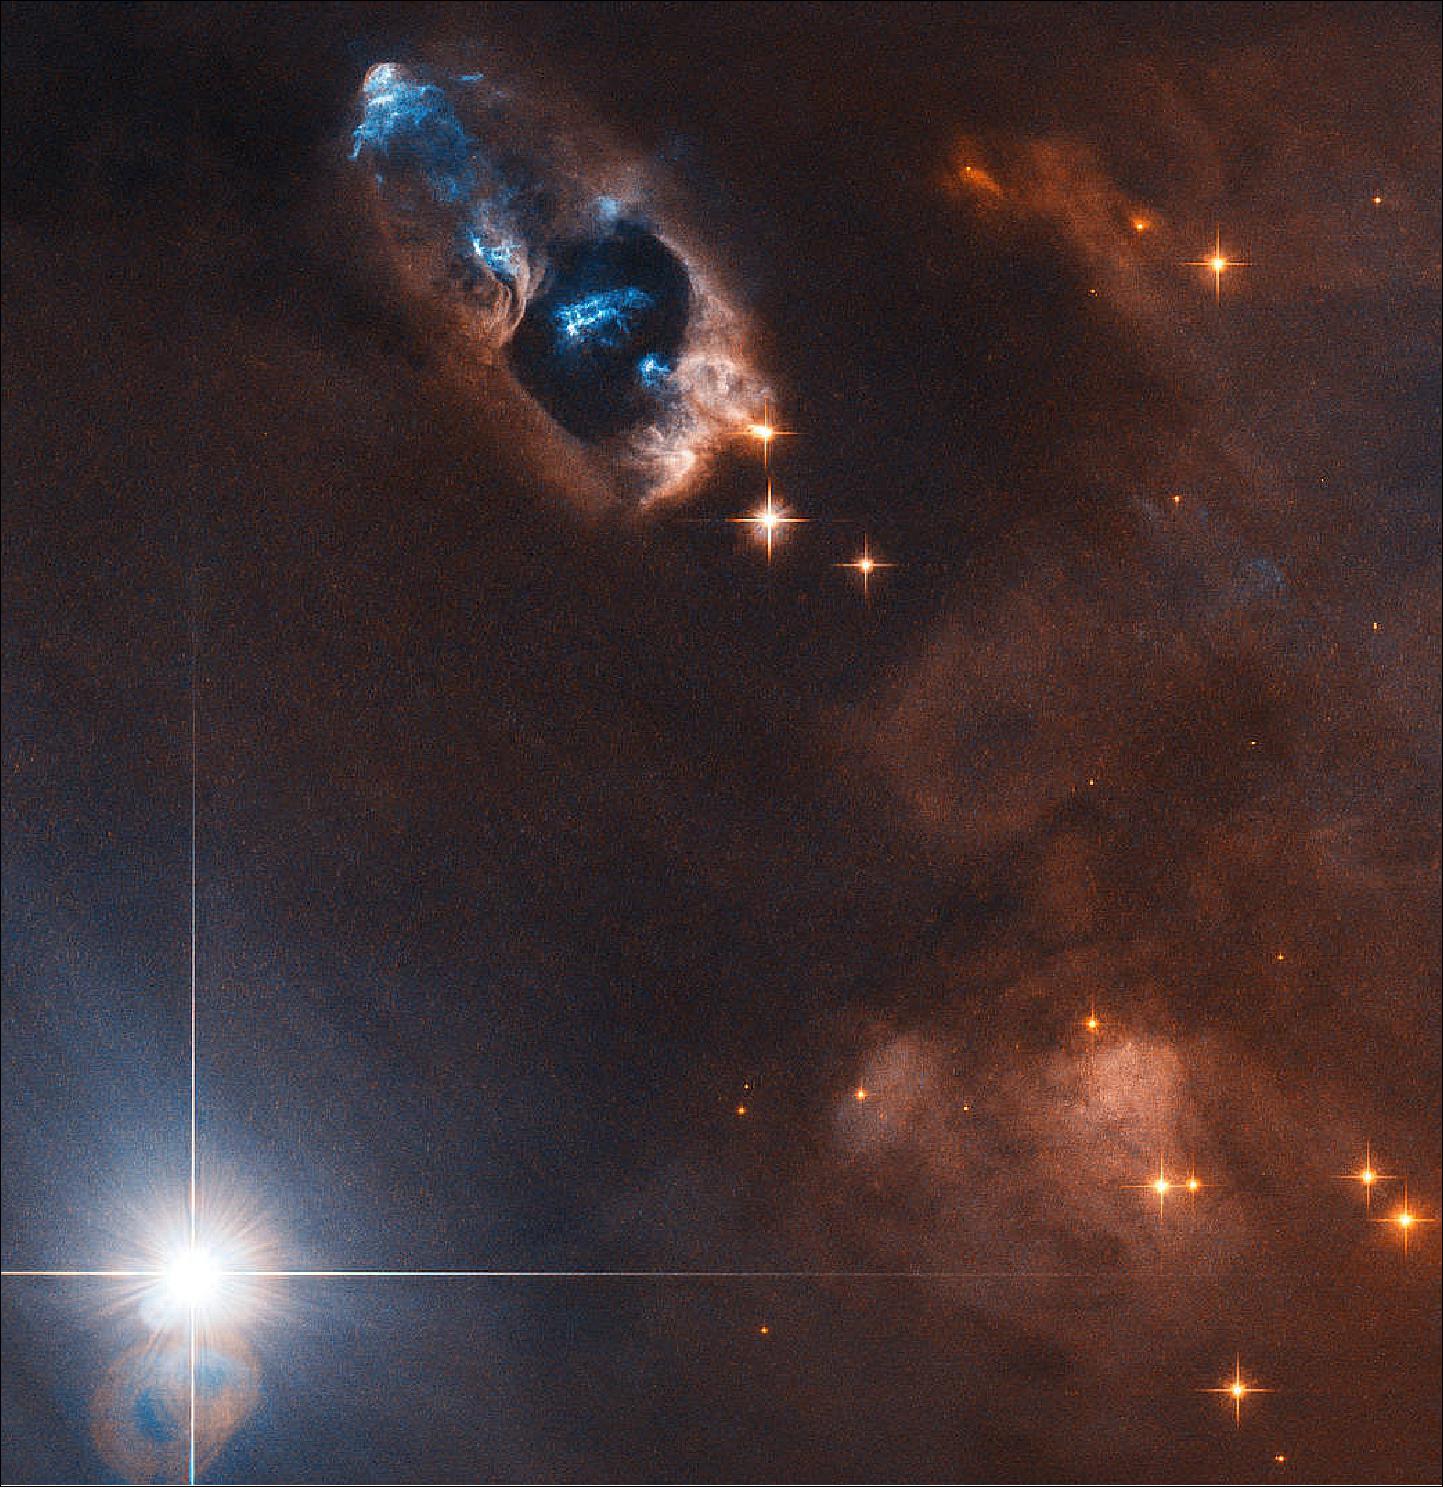 Figure 71: In this image, the NASA/ESA Hubble Space Telescope has captured the smoking gun of a newborn star, the Herbig–Haro objects numbered 7 to 11 (HH 7–11). These five objects, visible in blue in the top center of the image, lie within NGC 1333, a reflection nebula full of gas and dust found about a thousand light-years away from Earth (image credit: ESA/Hubble & NASA, K. Stapelfeldt)